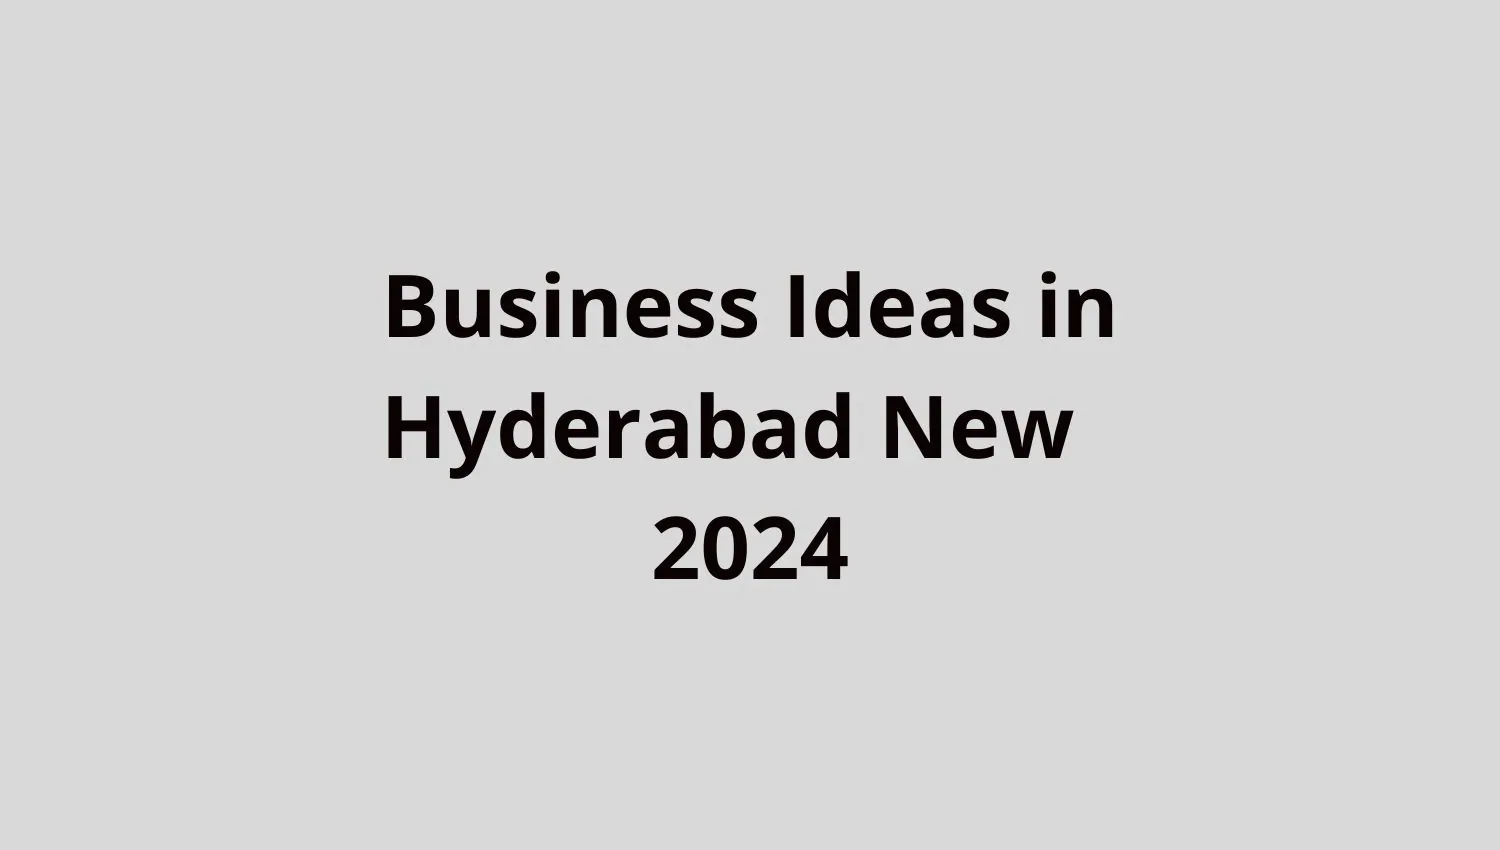 Business Ideas in Hyderabad New Profitable Successful in 2024 for Startup in India